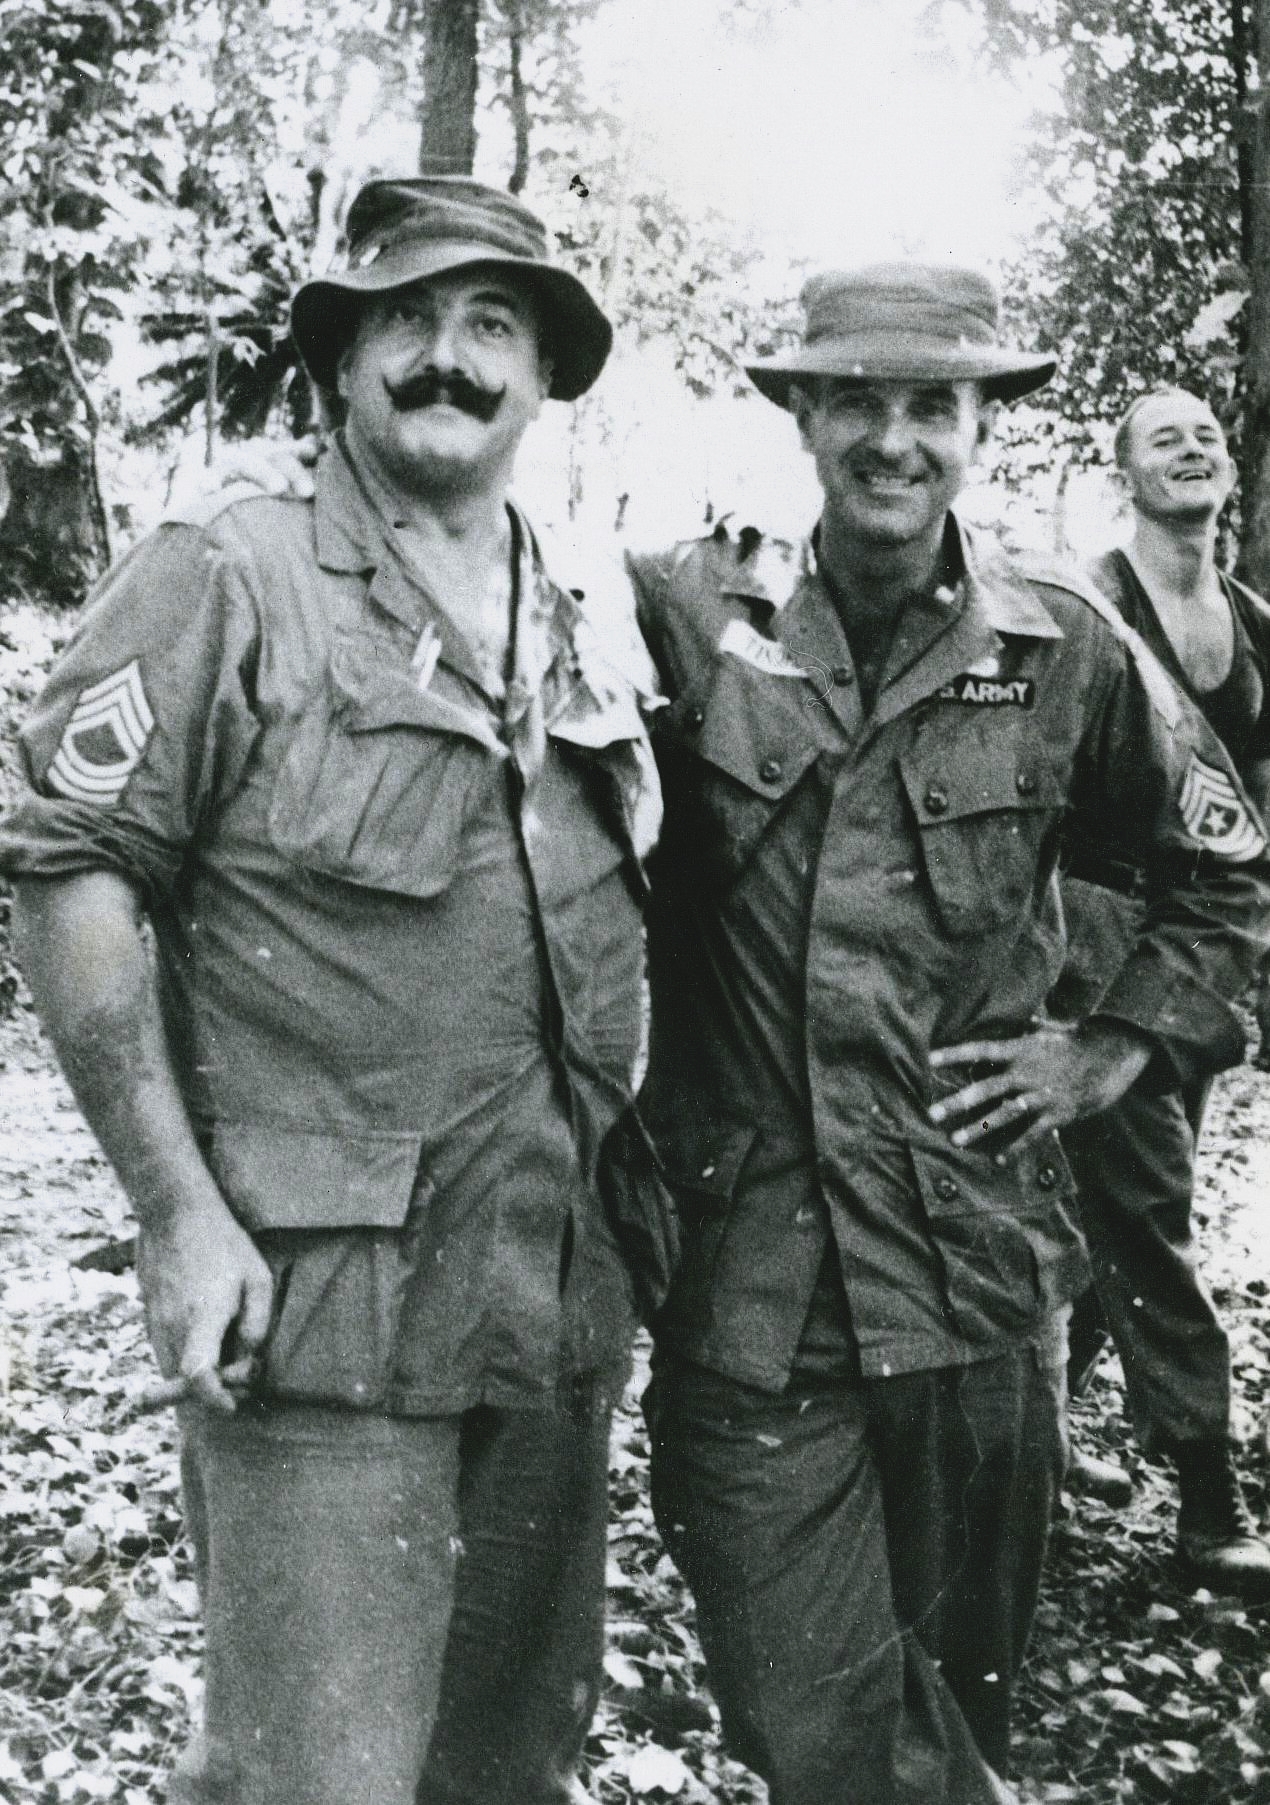 MSG Greald N. \'Moose\'Brannon, SGM Rush R. Tindell, and SGT Louis I. Holmes, building B-430 Special Forces Camp in the rain forrest of Trang, South Thailand. November 1966